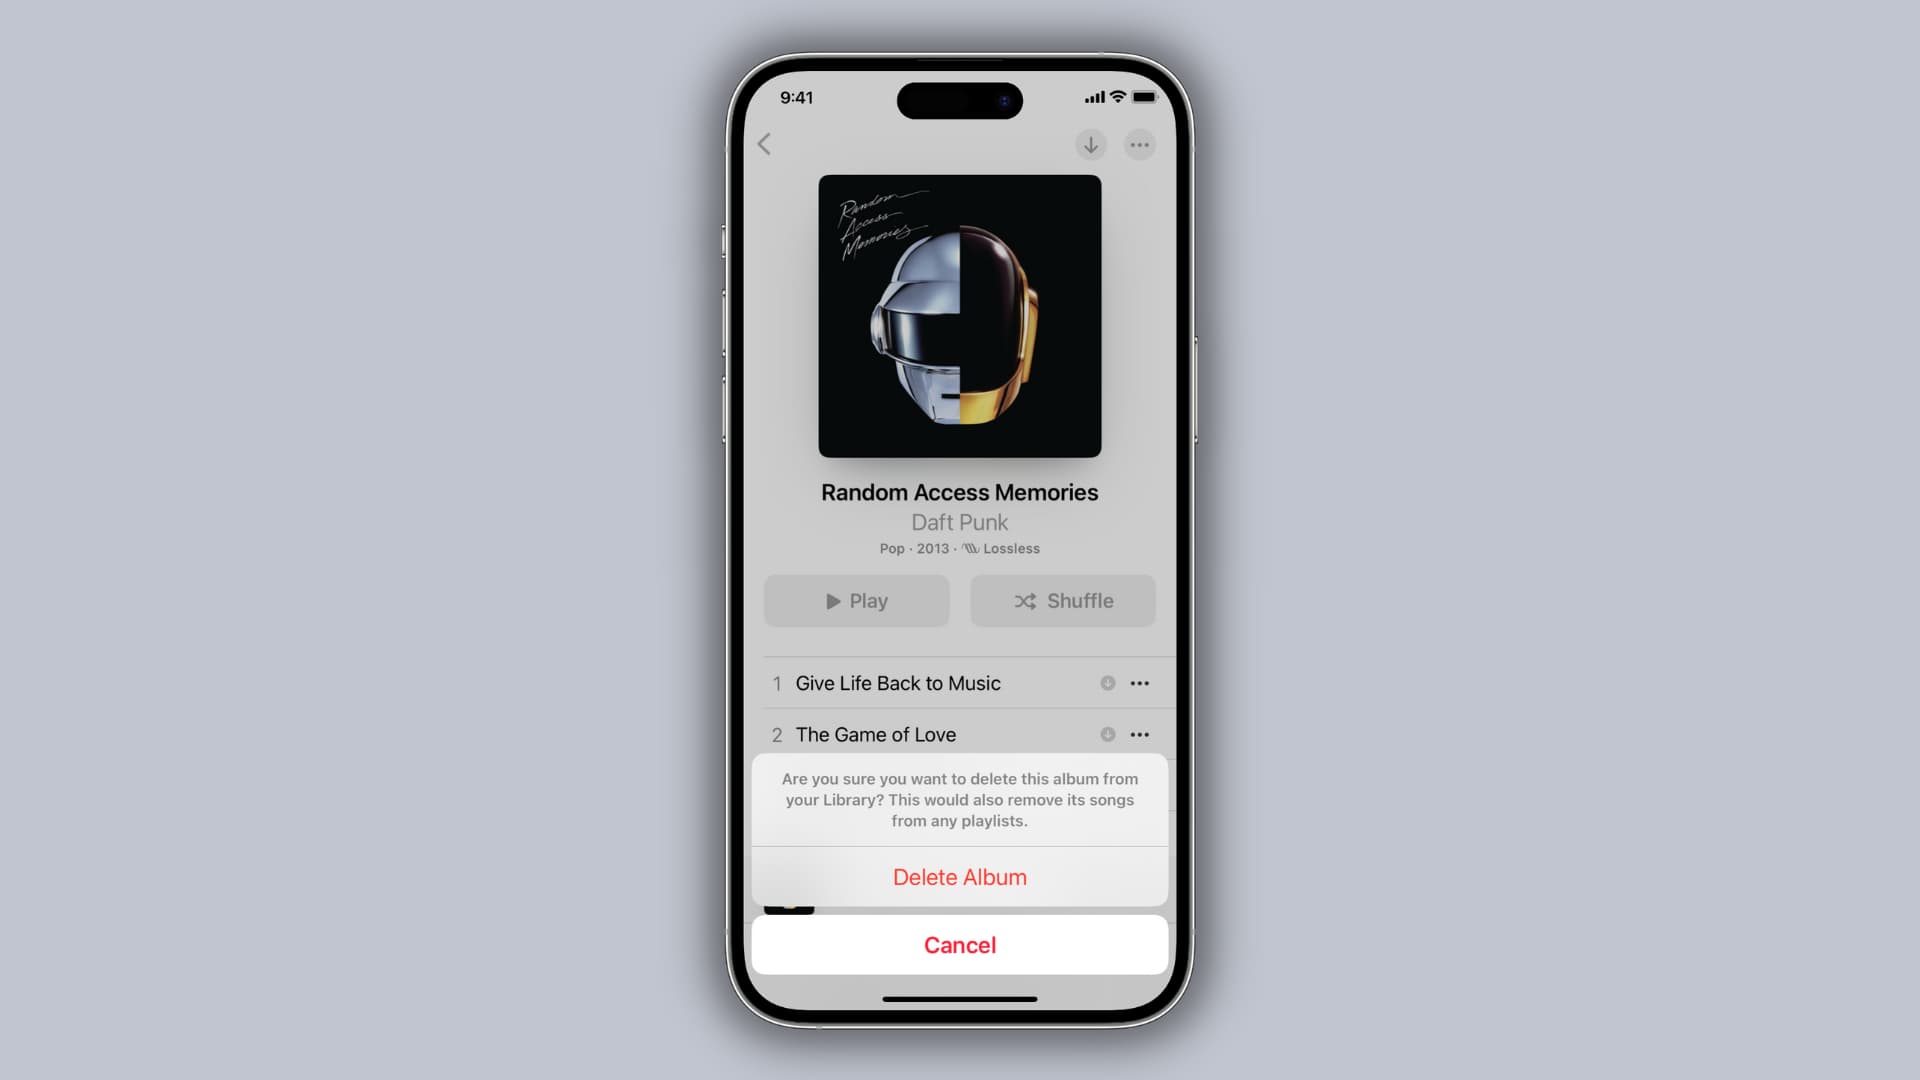 a-step-by-step-guide-on-how-to-delete-music-from-your-iphone-or-ipad